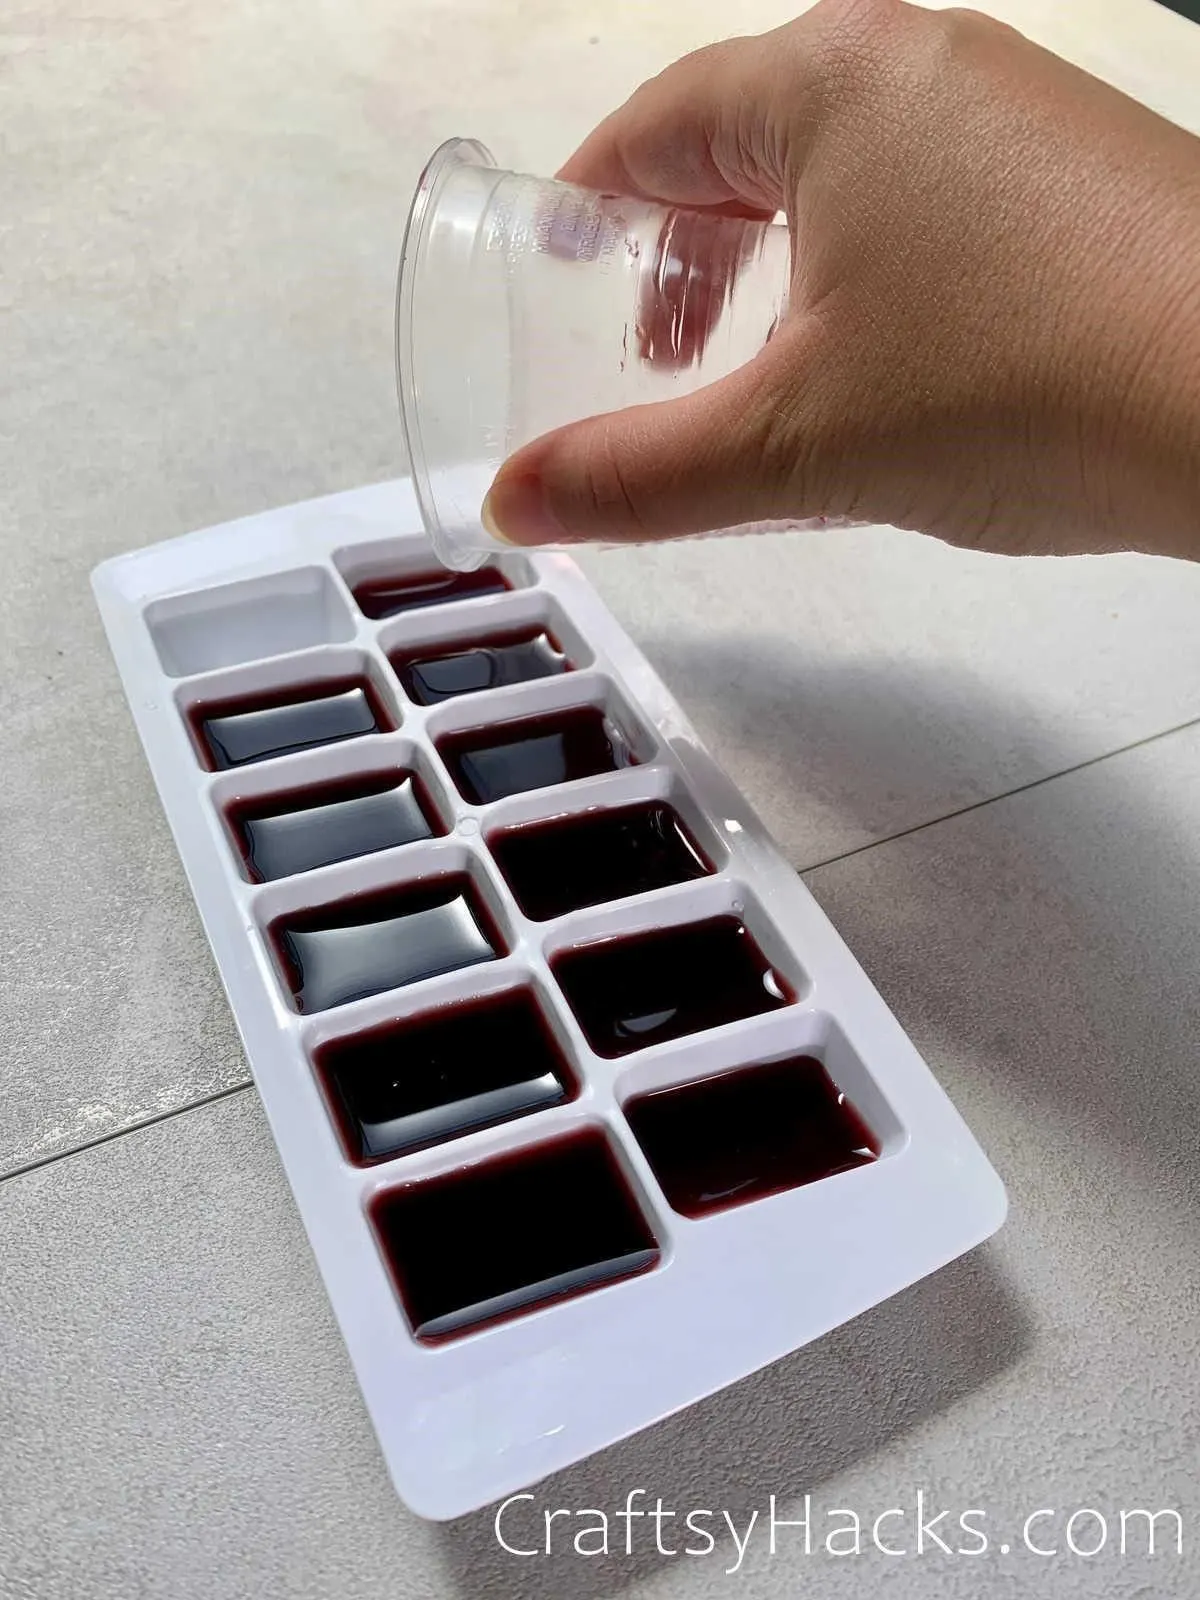 freeze wine in ice cube tray